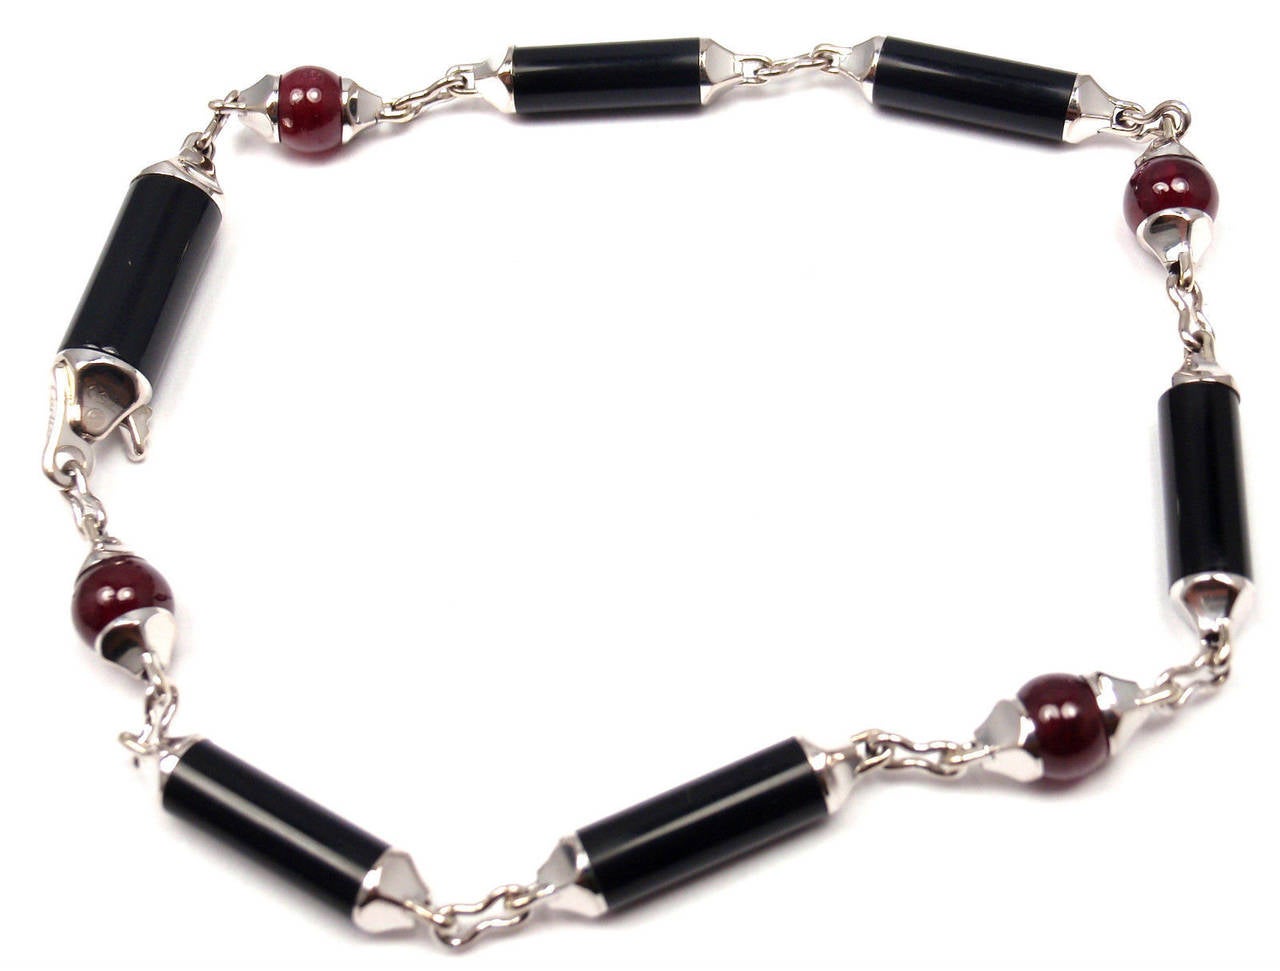 18k White Gold Ruby & Onyx Bracelet by Cartier. 
Part of the Cartier Le Baiser Du Dragon Collection. 
With 6 pieces of onyx bars 12mm x 4mm each
4 5mm ruby beads

Details: 
Weight:  10.9 grams
Length: 7.5 inches 
Width: 5mm
Stamped